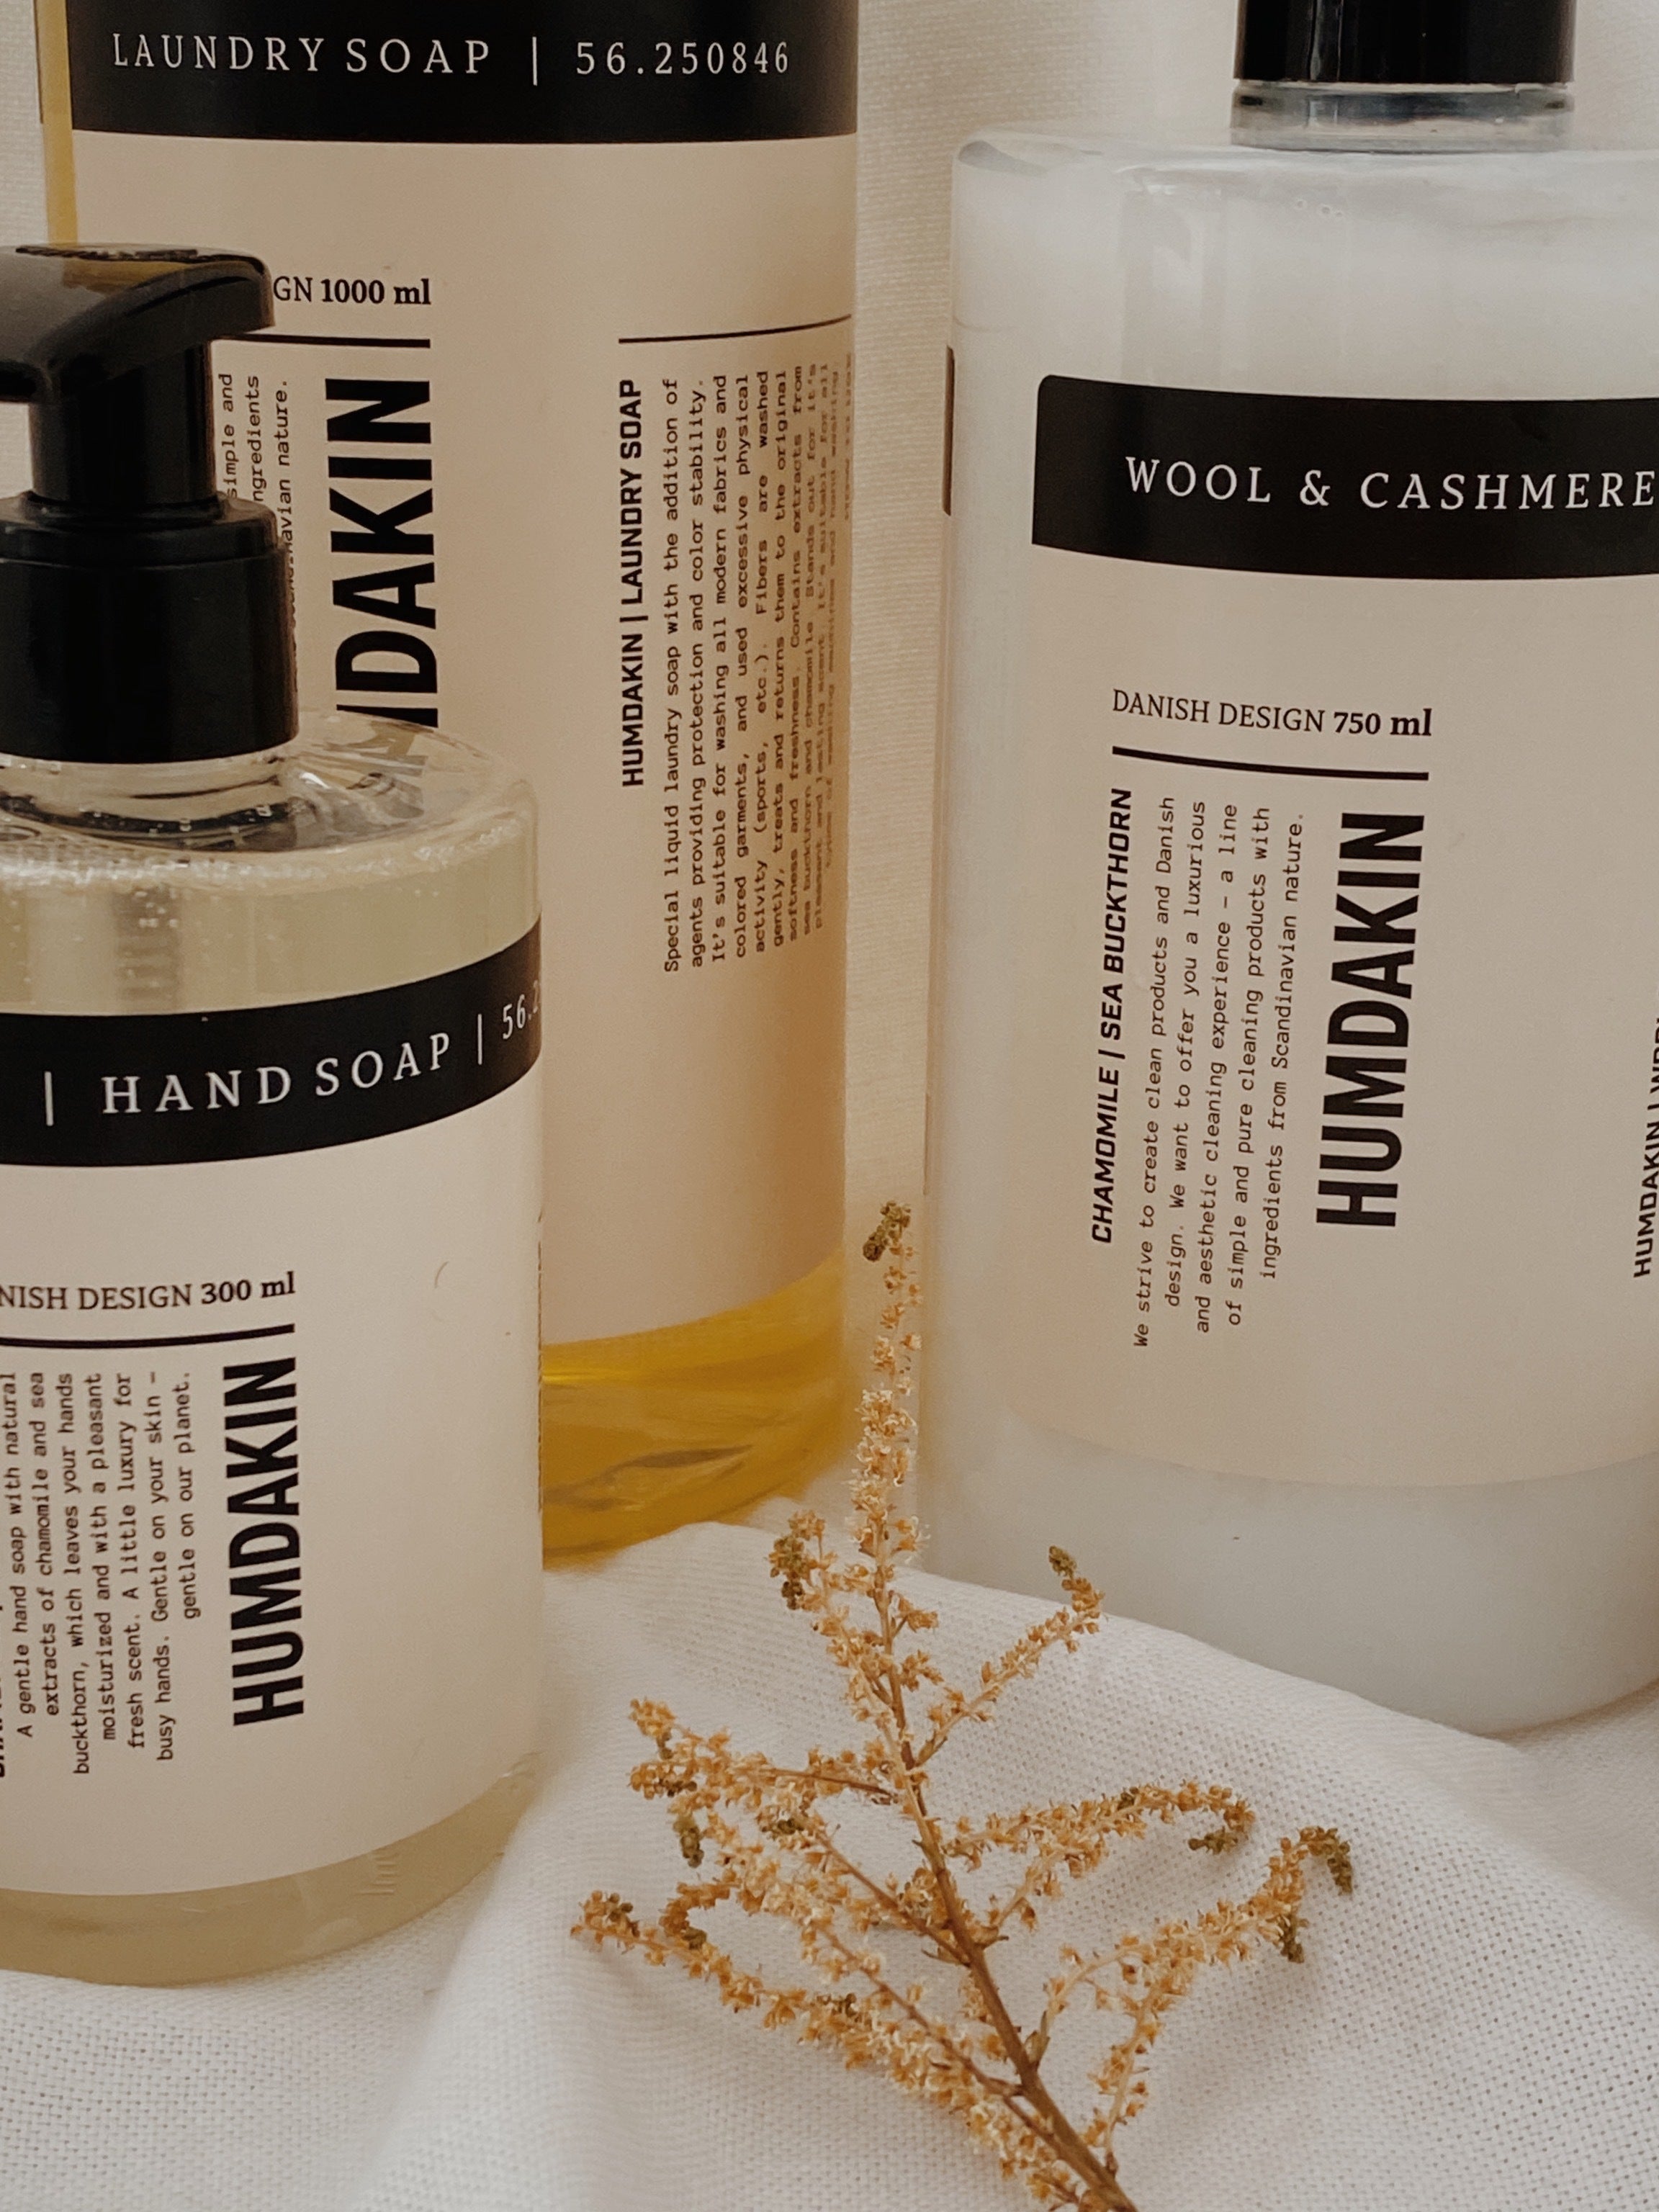 Wool and cashmere laundry detergent